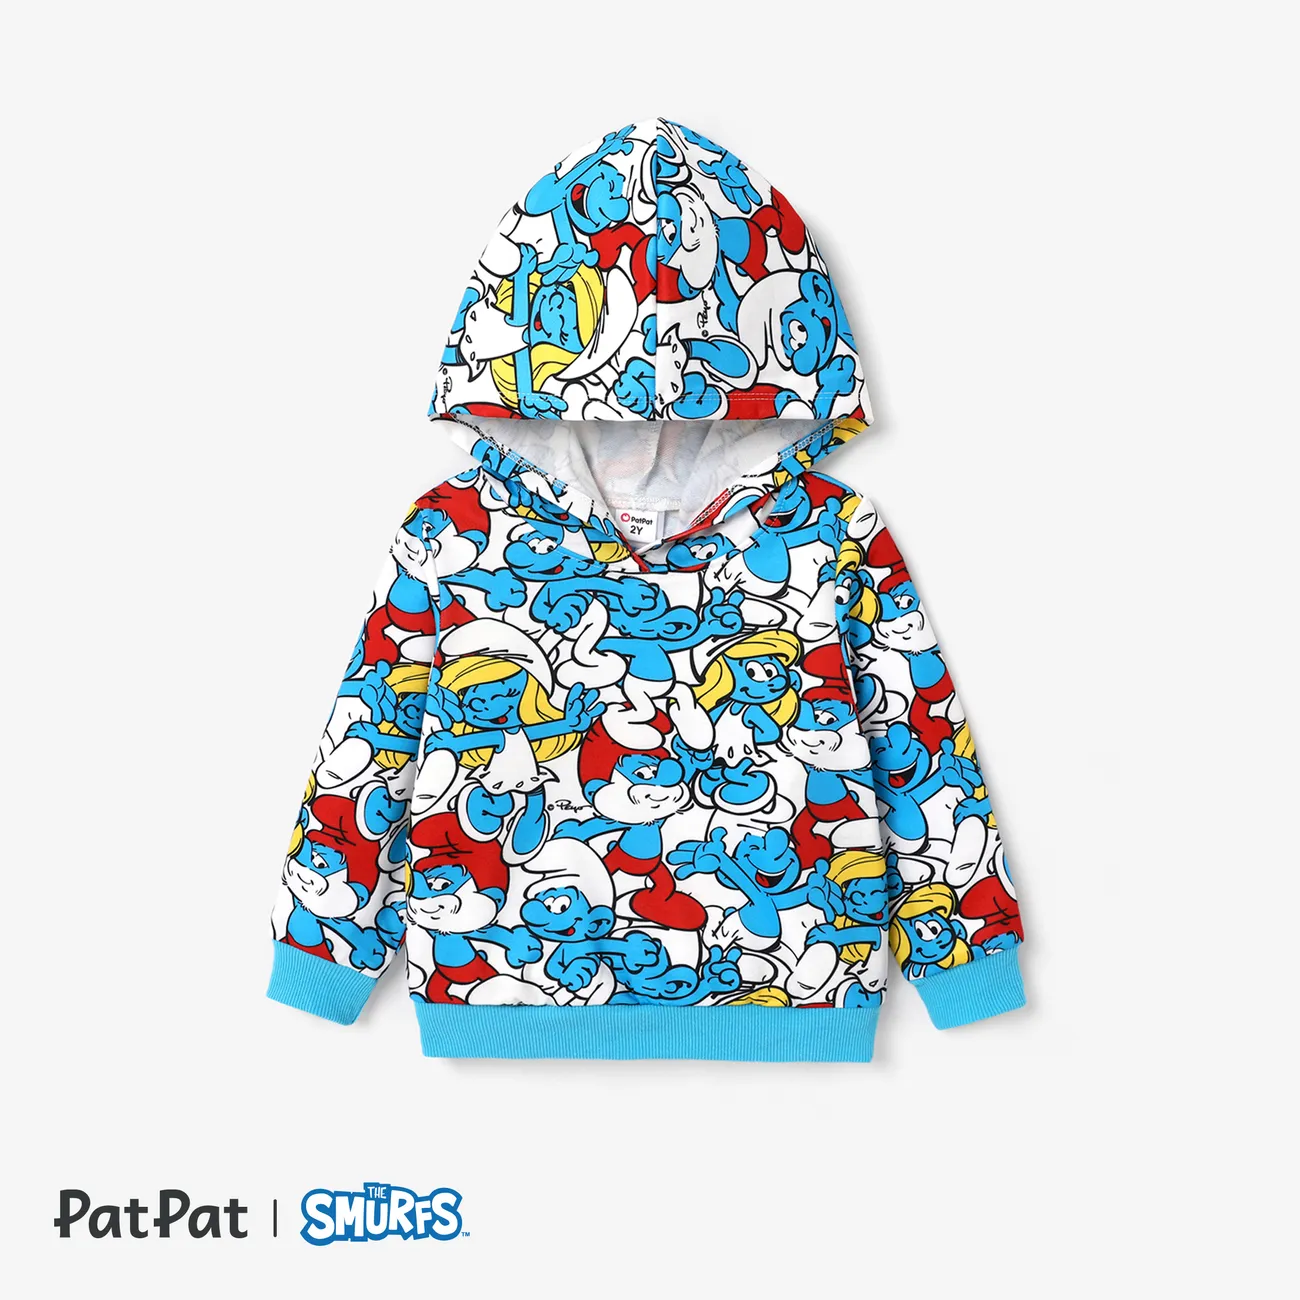 The Smurfs Family Matching Character Graphic Print Long-sleeve Hooded Tops BLUEWHITE big image 1